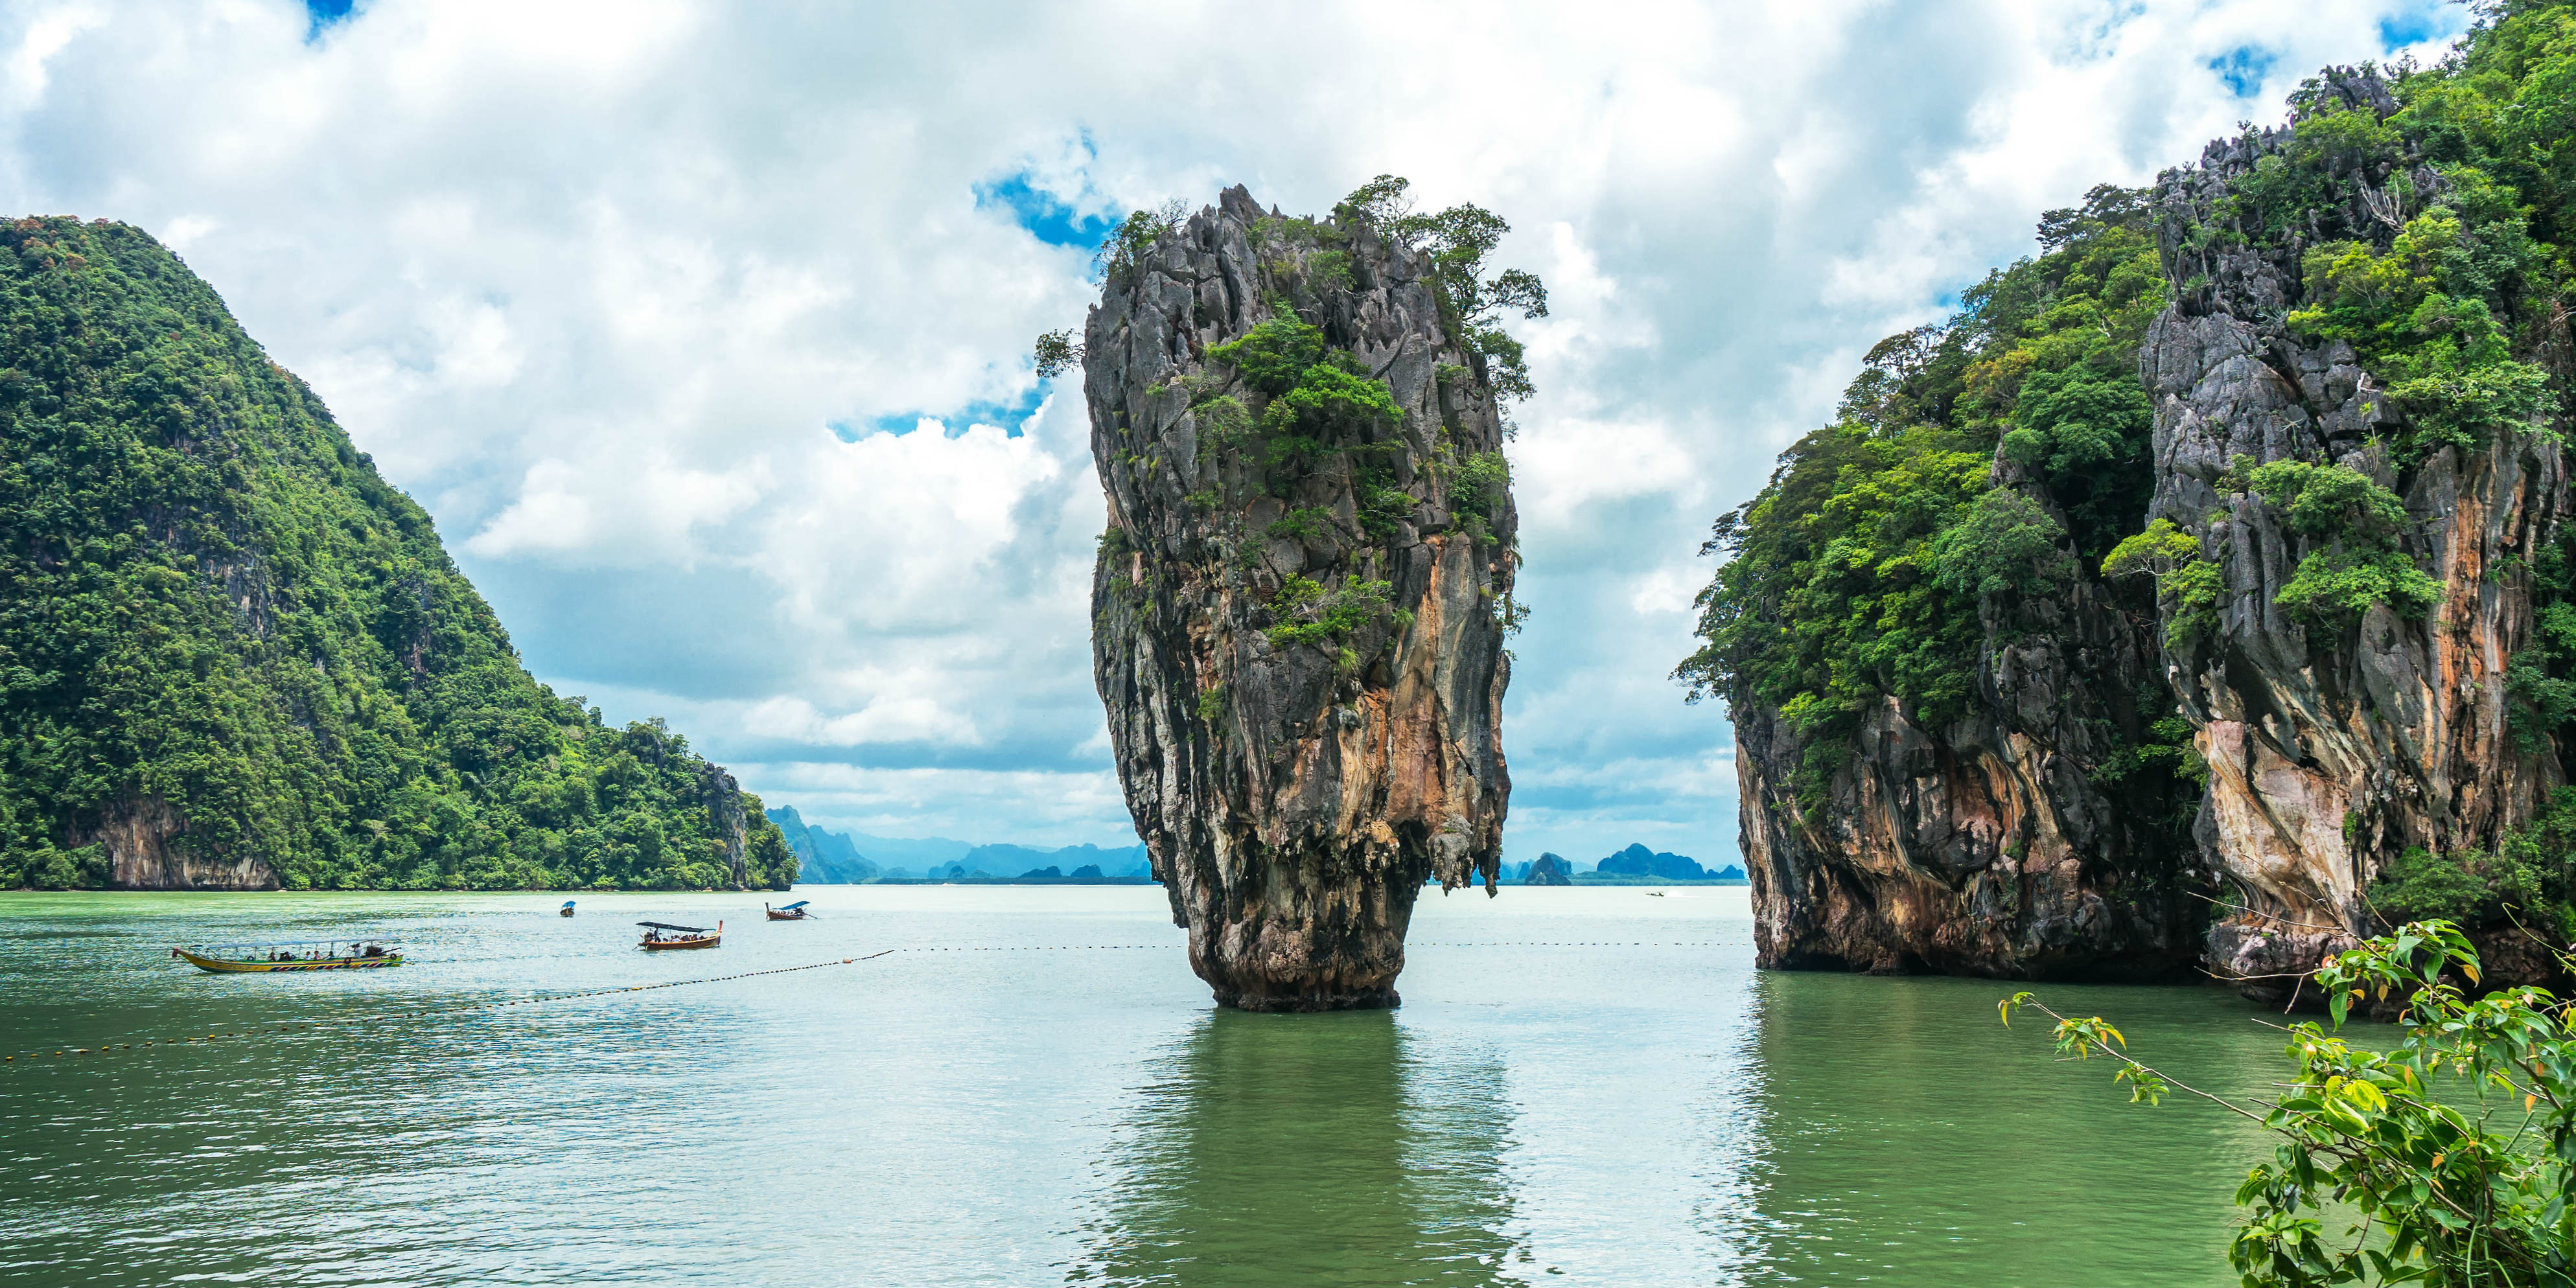 Boat trips around Phang Nga bay, Thailand, include amazing views and the James Bond Island shown here. 